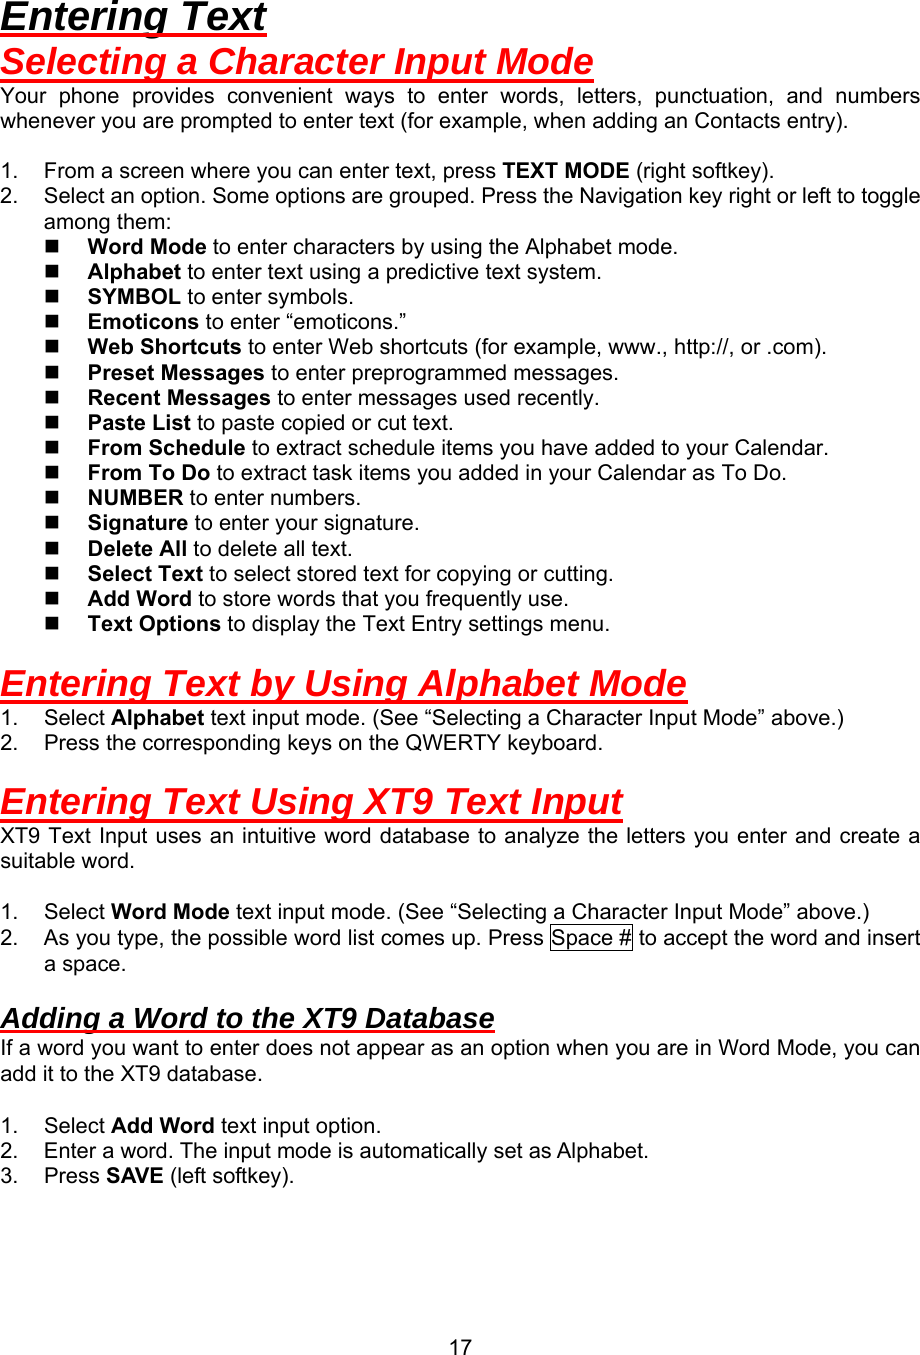  17Entering Text Selecting a Character Input Mode Your phone provides convenient ways to enter words, letters, punctuation, and numbers whenever you are prompted to enter text (for example, when adding an Contacts entry).  1.  From a screen where you can enter text, press TEXT MODE (right softkey). 2.  Select an option. Some options are grouped. Press the Navigation key right or left to toggle among them:   Word Mode to enter characters by using the Alphabet mode.   Alphabet to enter text using a predictive text system.   SYMBOL to enter symbols.   Emoticons to enter “emoticons.”   Web Shortcuts to enter Web shortcuts (for example, www., http://, or .com).   Preset Messages to enter preprogrammed messages.   Recent Messages to enter messages used recently.   Paste List to paste copied or cut text.   From Schedule to extract schedule items you have added to your Calendar.   From To Do to extract task items you added in your Calendar as To Do.   NUMBER to enter numbers.   Signature to enter your signature.   Delete All to delete all text.   Select Text to select stored text for copying or cutting.   Add Word to store words that you frequently use.   Text Options to display the Text Entry settings menu.  Entering Text by Using Alphabet Mode 1. Select Alphabet text input mode. (See “Selecting a Character Input Mode” above.) 2.  Press the corresponding keys on the QWERTY keyboard.  Entering Text Using XT9 Text Input XT9 Text Input uses an intuitive word database to analyze the letters you enter and create a suitable word.  1. Select Word Mode text input mode. (See “Selecting a Character Input Mode” above.) 2.  As you type, the possible word list comes up. Press Space # to accept the word and insert a space.    Adding a Word to the XT9 Database If a word you want to enter does not appear as an option when you are in Word Mode, you can add it to the XT9 database.  1. Select Add Word text input option. 2.  Enter a word. The input mode is automatically set as Alphabet. 3. Press SAVE (left softkey).  